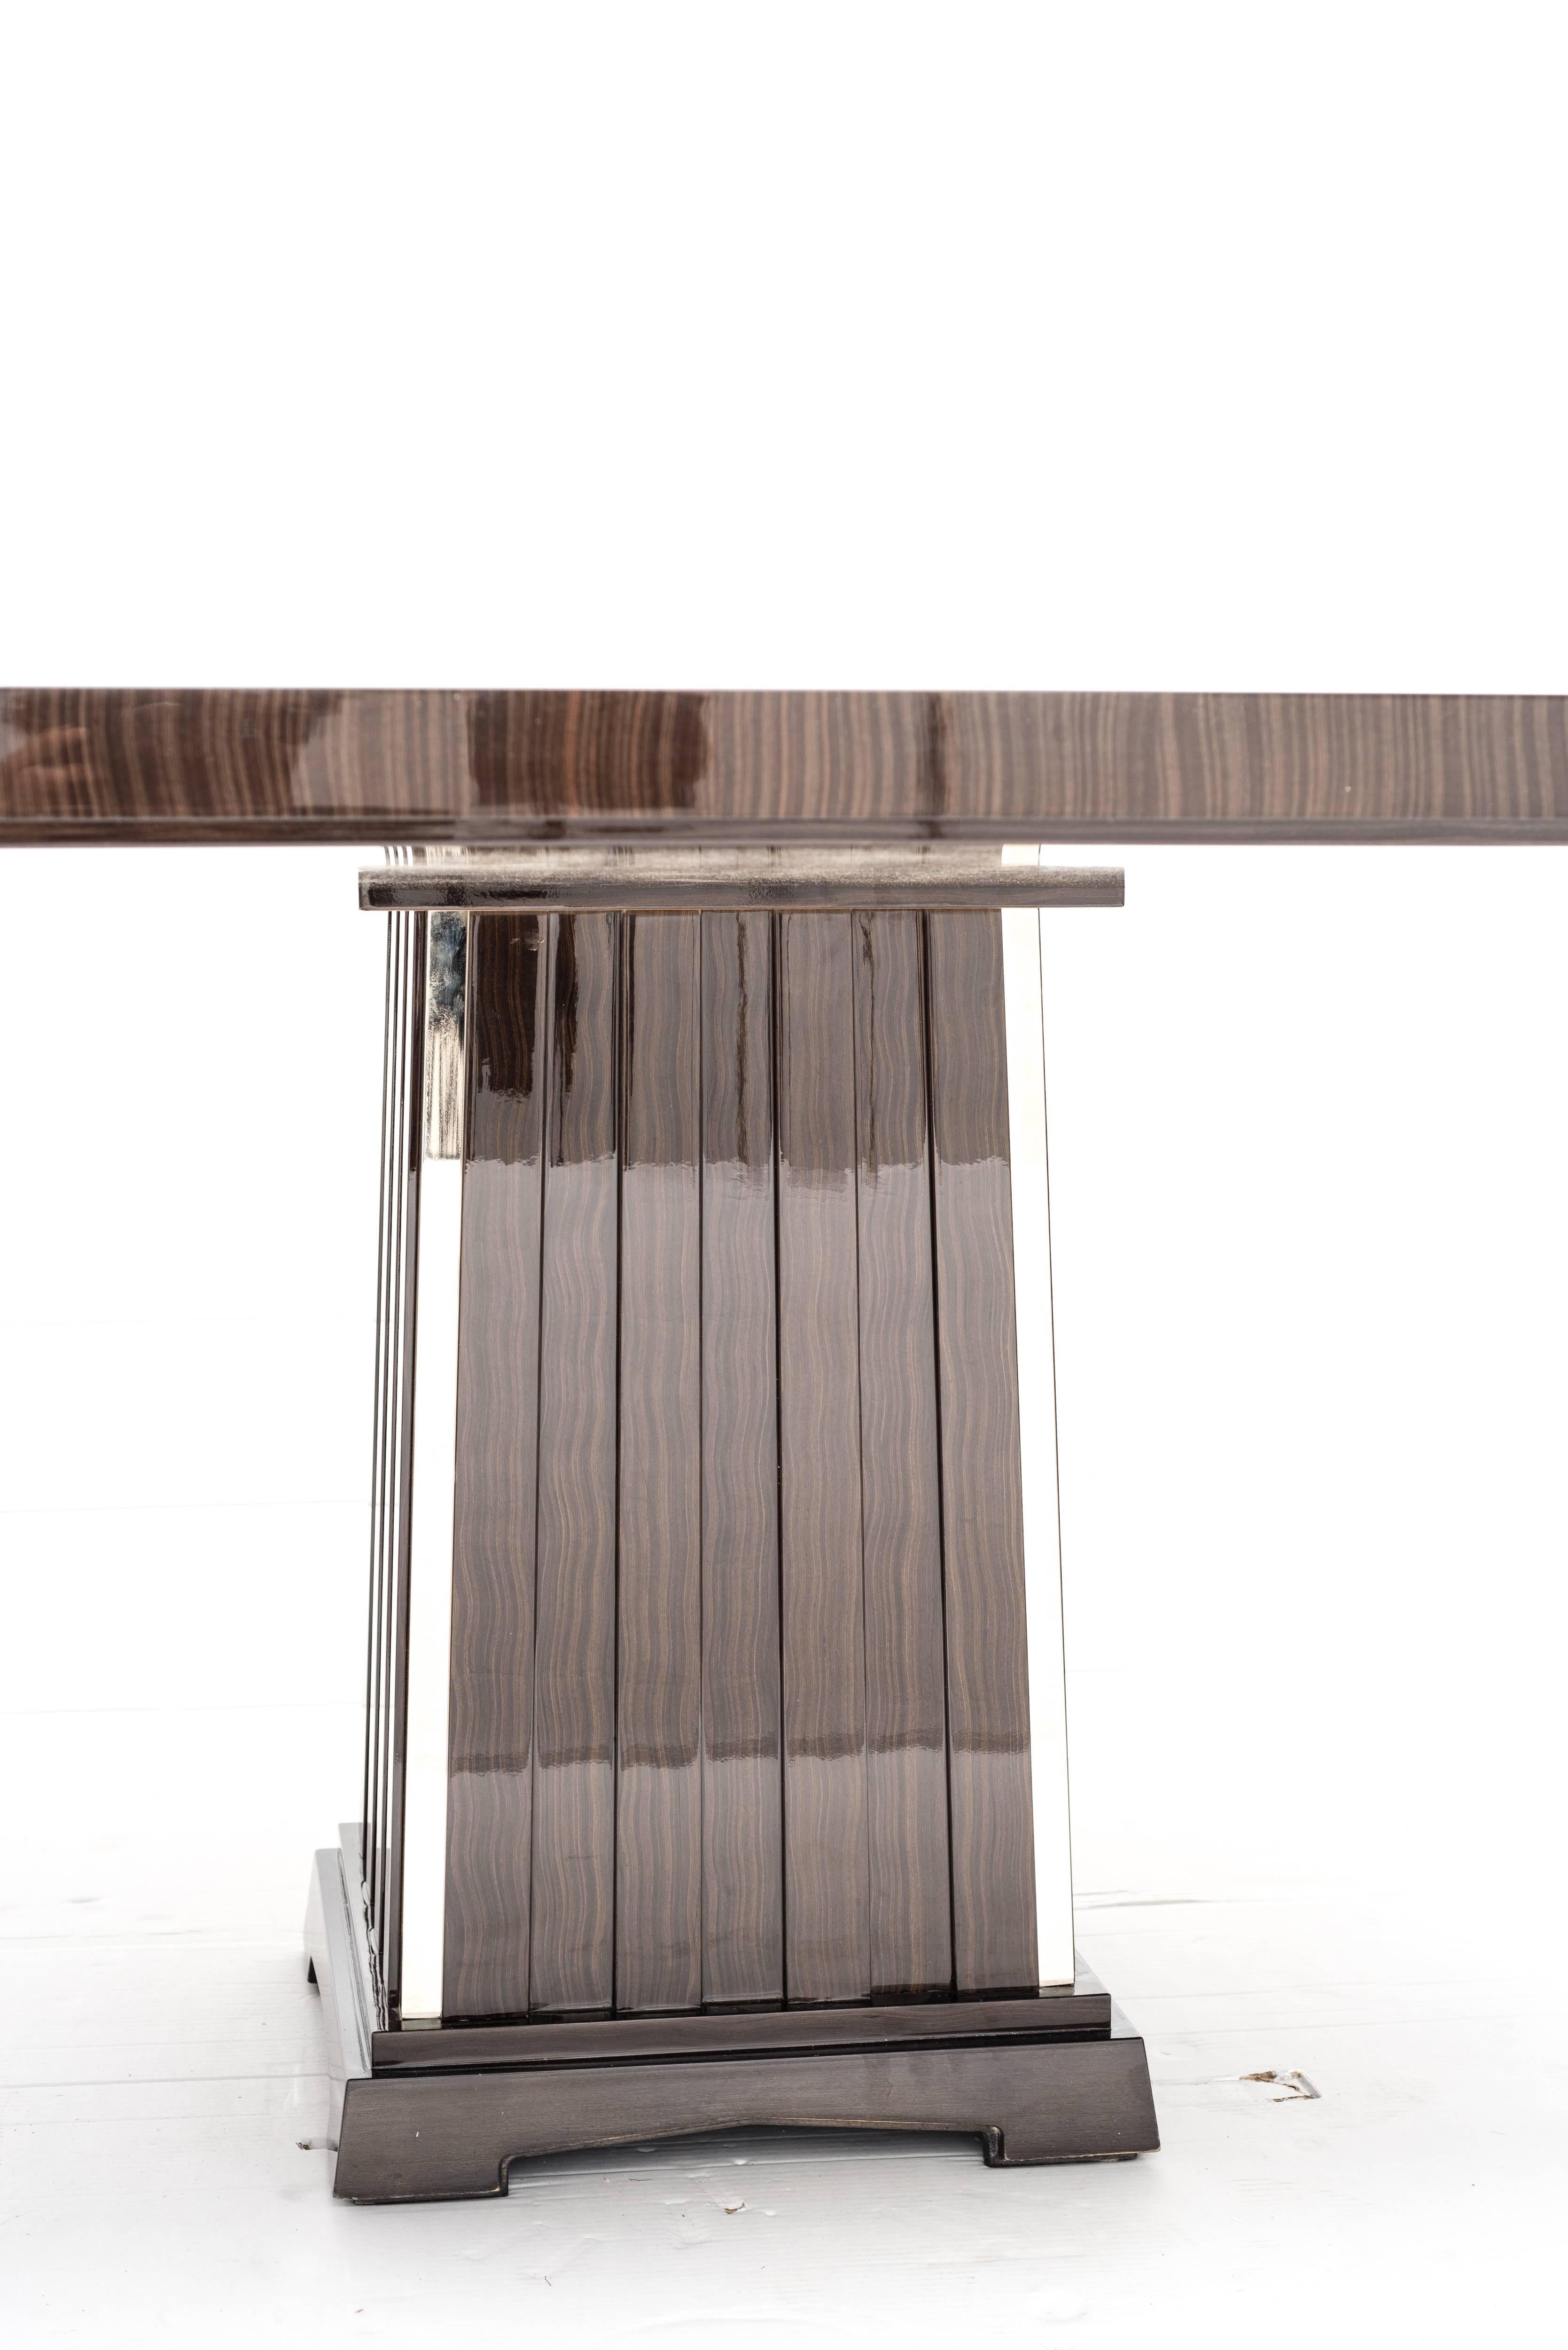 Art Deco Fine Bespoke Dining Room Table, Veneer Wood Top and Base with Chrome Inserts,